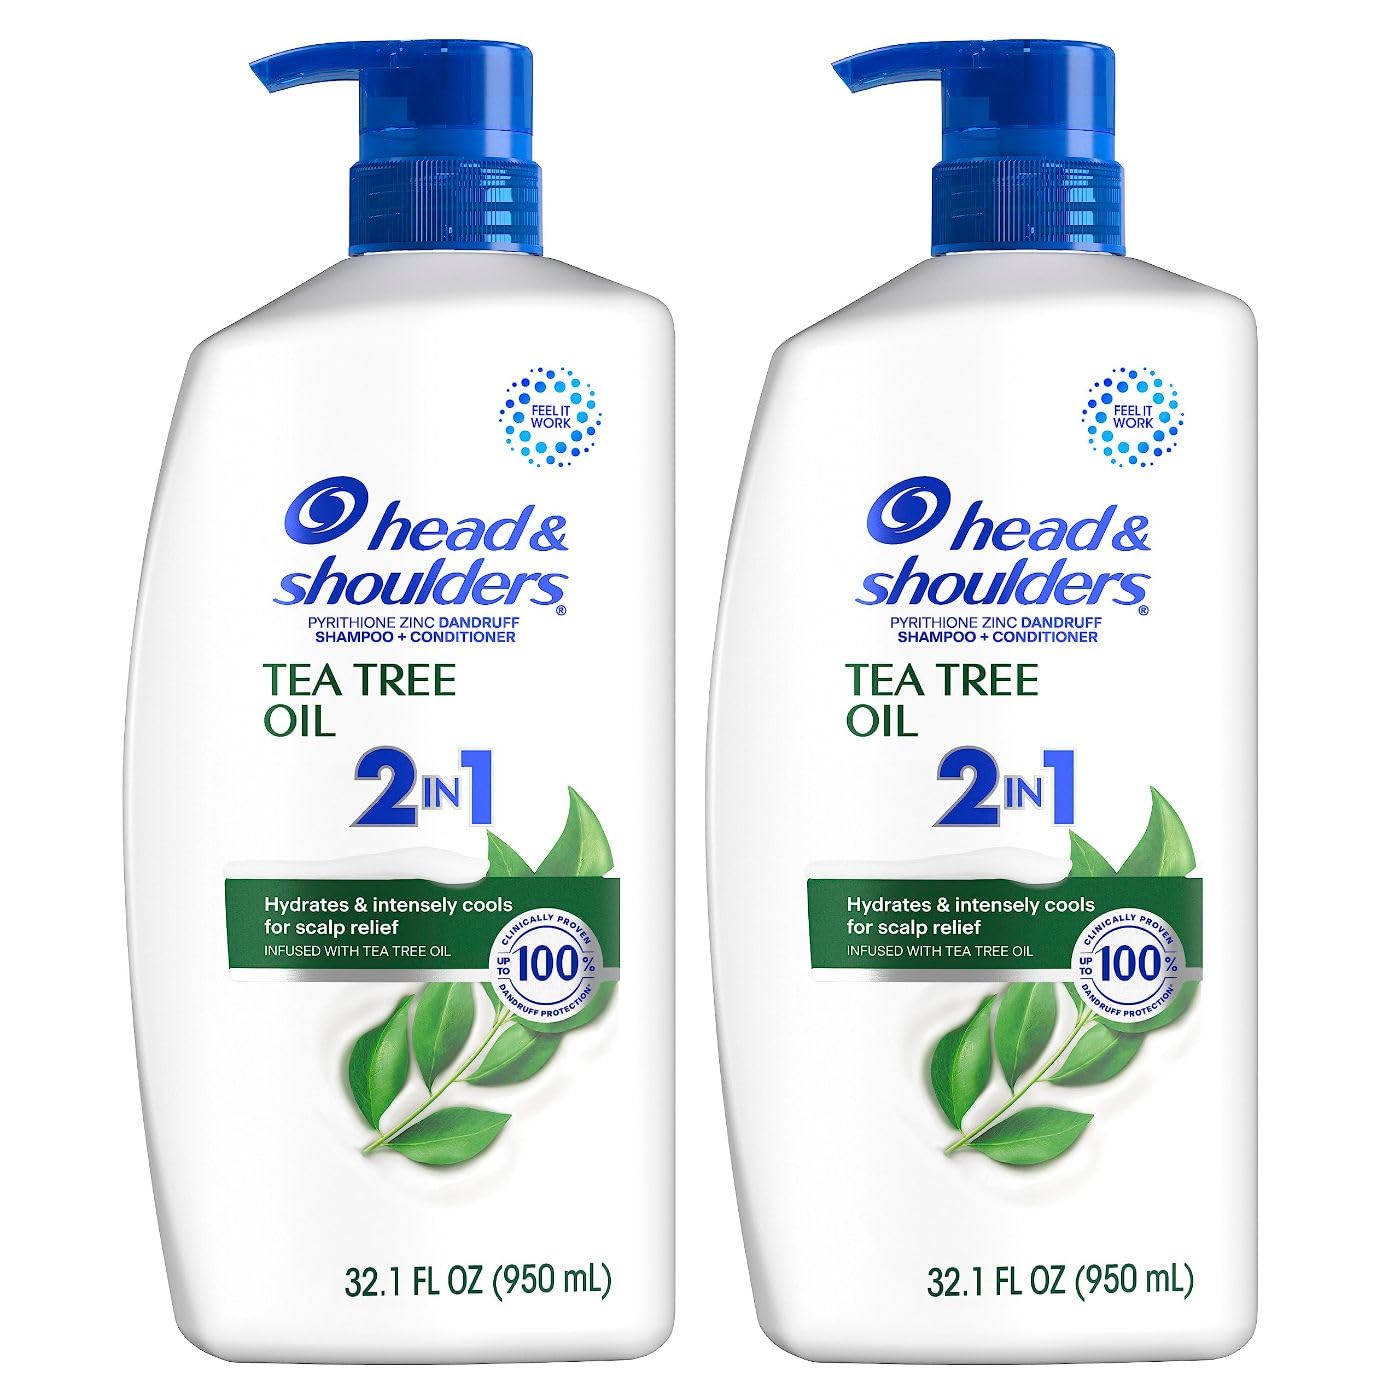 Head & Shoulders 2 in 1 Dandruff Shampoo and Conditioner, Anti-Dandruff Treatment, Tea Tree Oil for Daily Use, 32.1 oz Each, Twin Pack